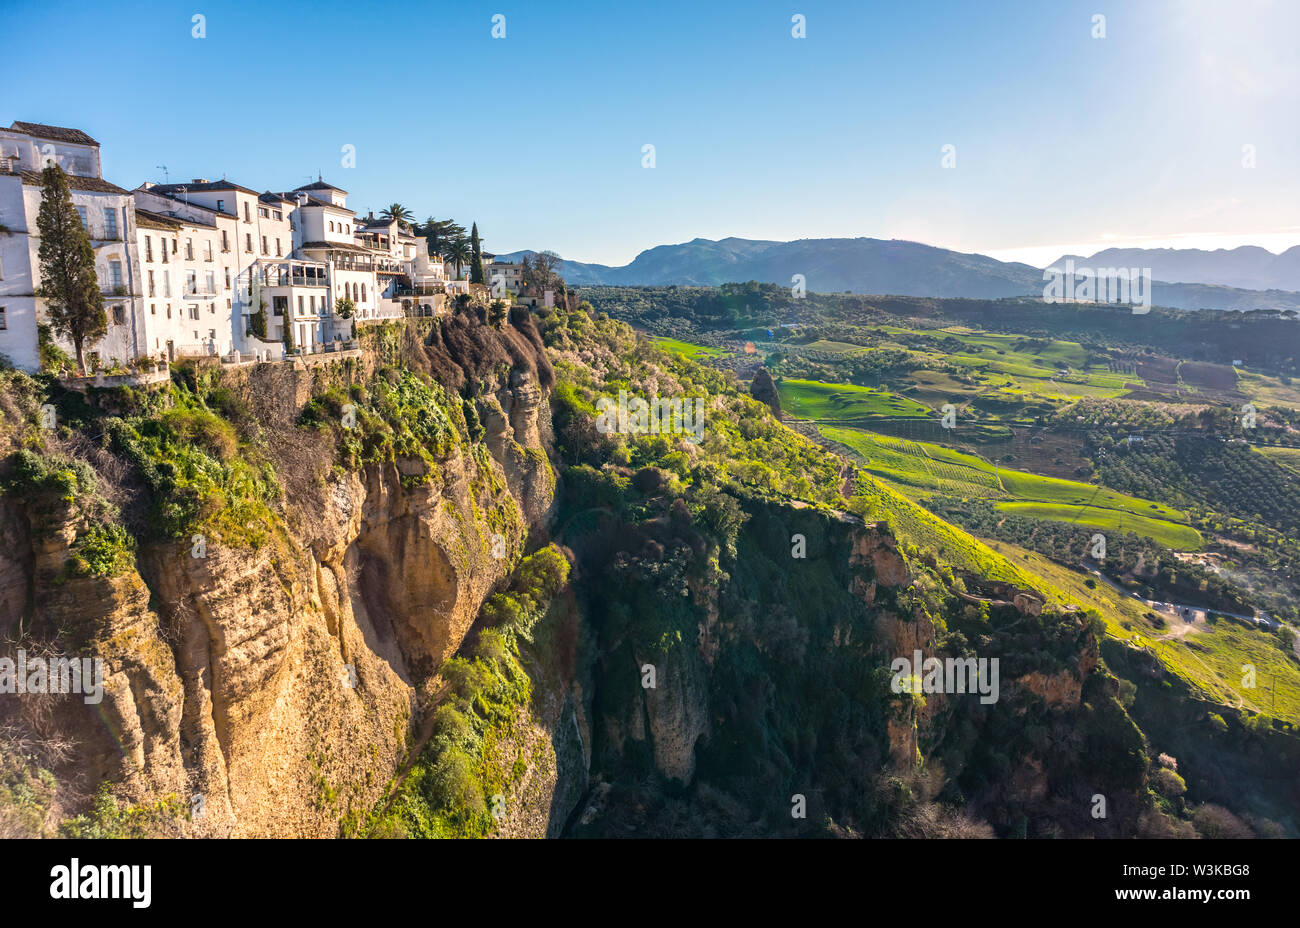 Ronda, Spain: Landscape of white houses on the green edges of steep cliffs with mountains in the background. Stock Photo